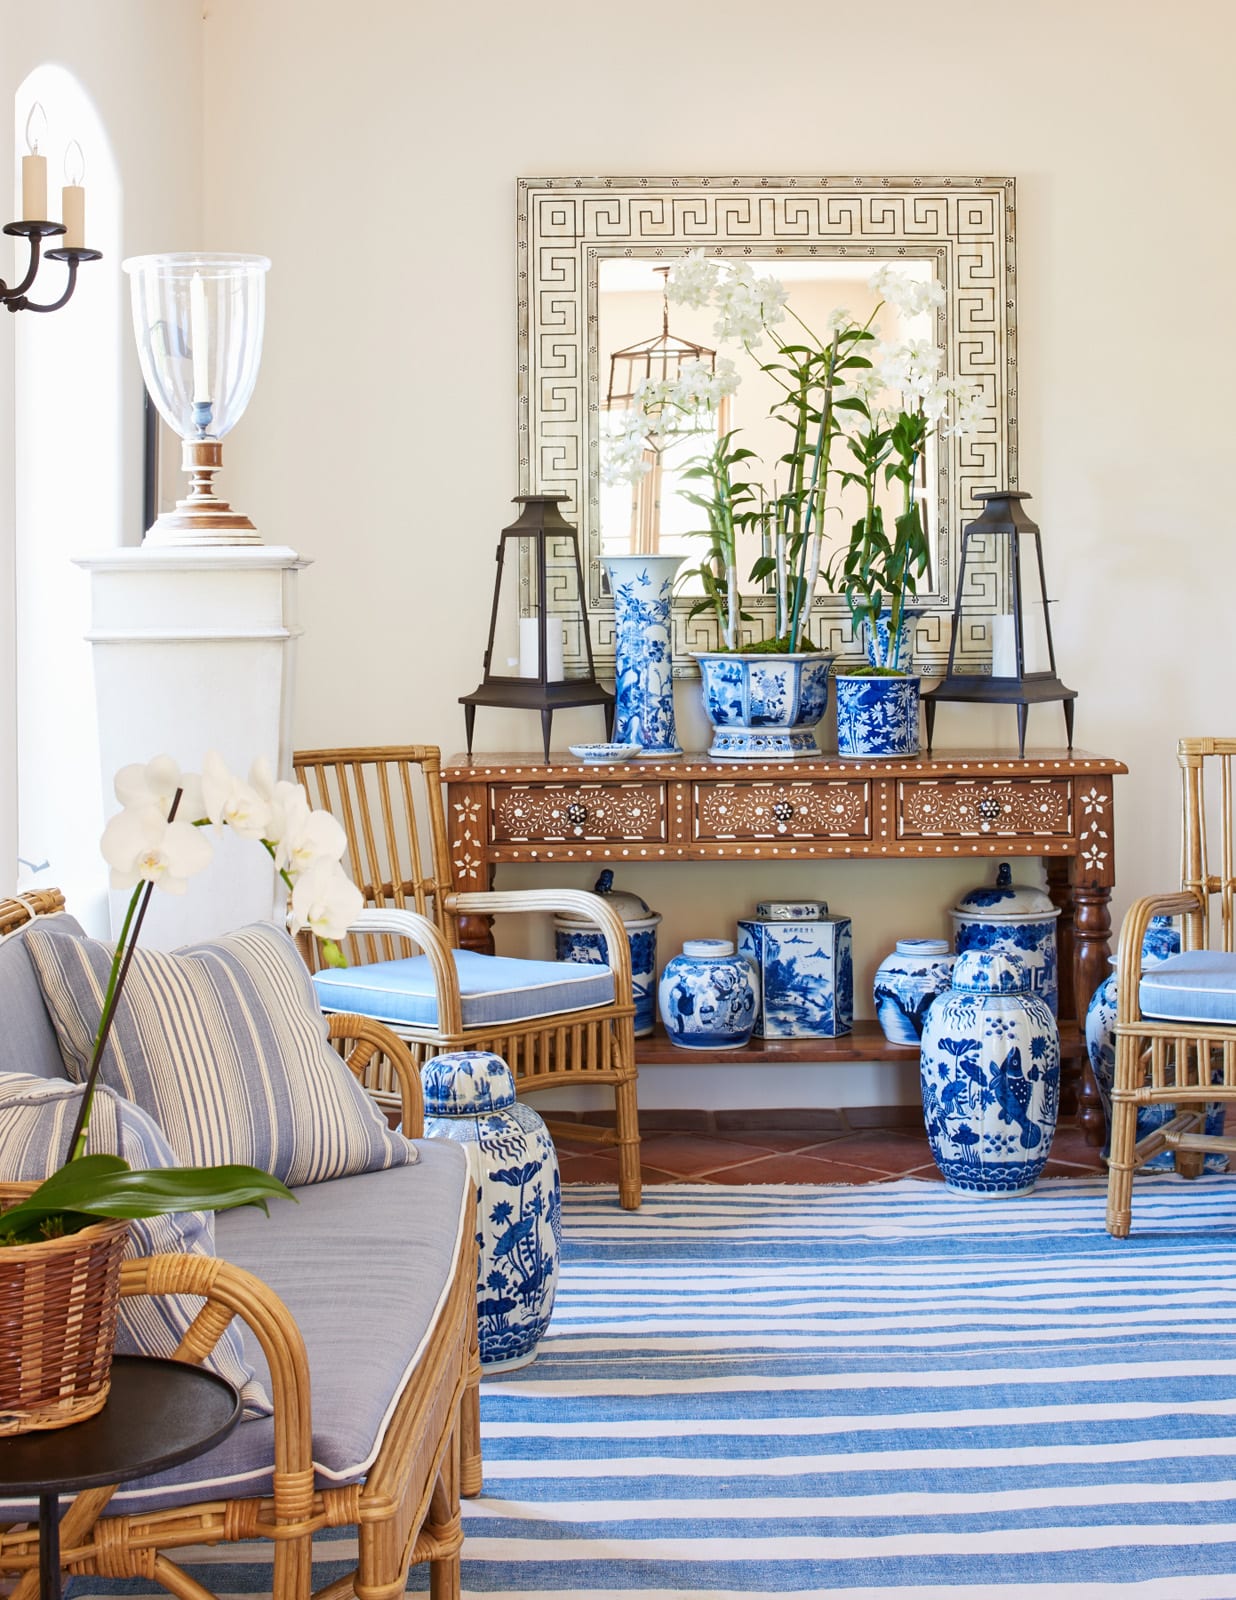 10 Favorites in Blue & White with the fabulous Mark D. Sikes - Amy Neunsinger Photography -porch - covered porch - porch design - porch decor - 